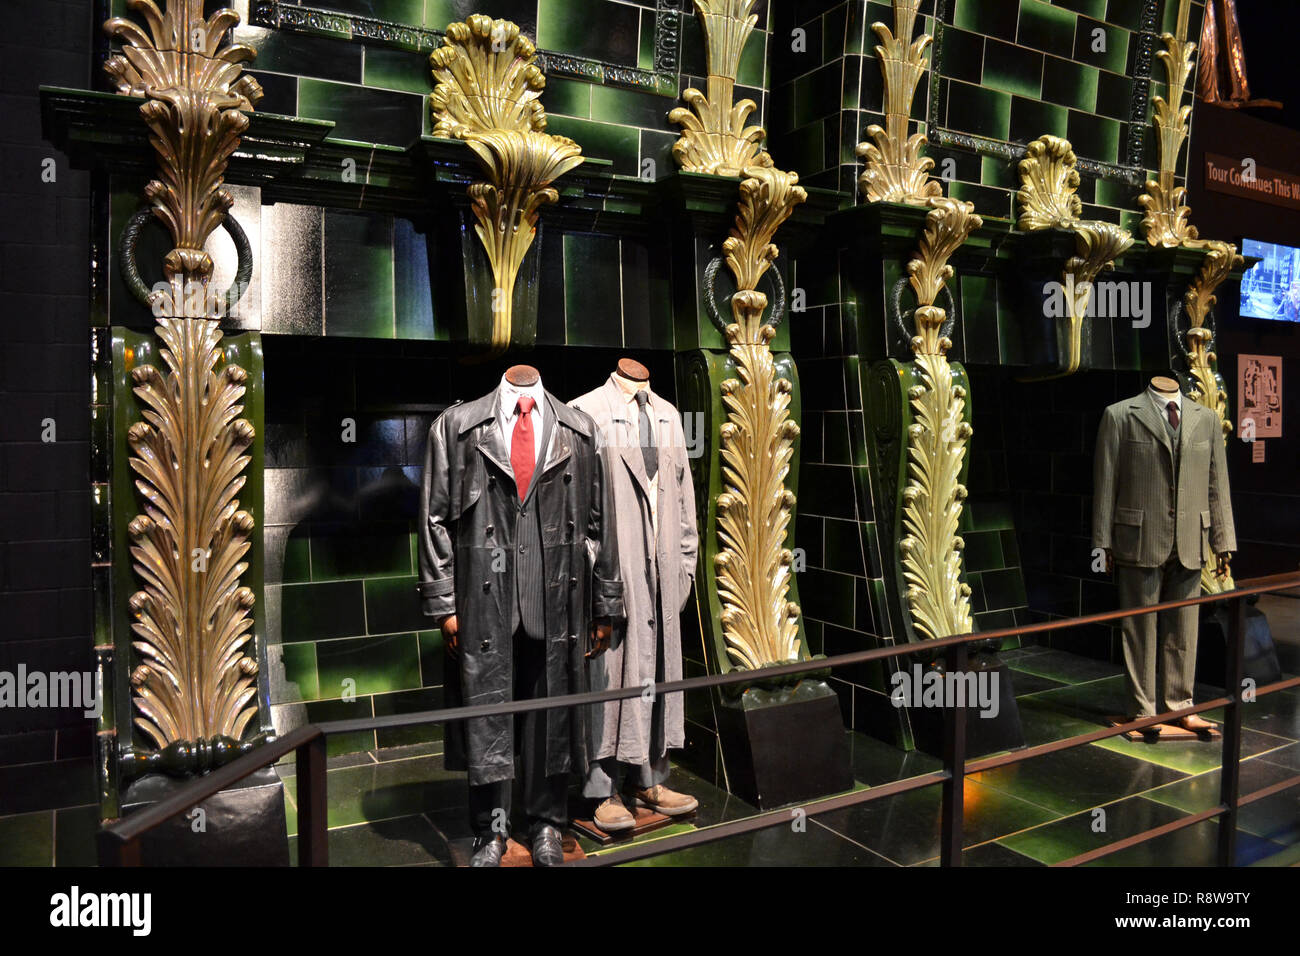 The ministry of magic at the Harry Potter Studios at Leavesden, London, UK Stock Photo